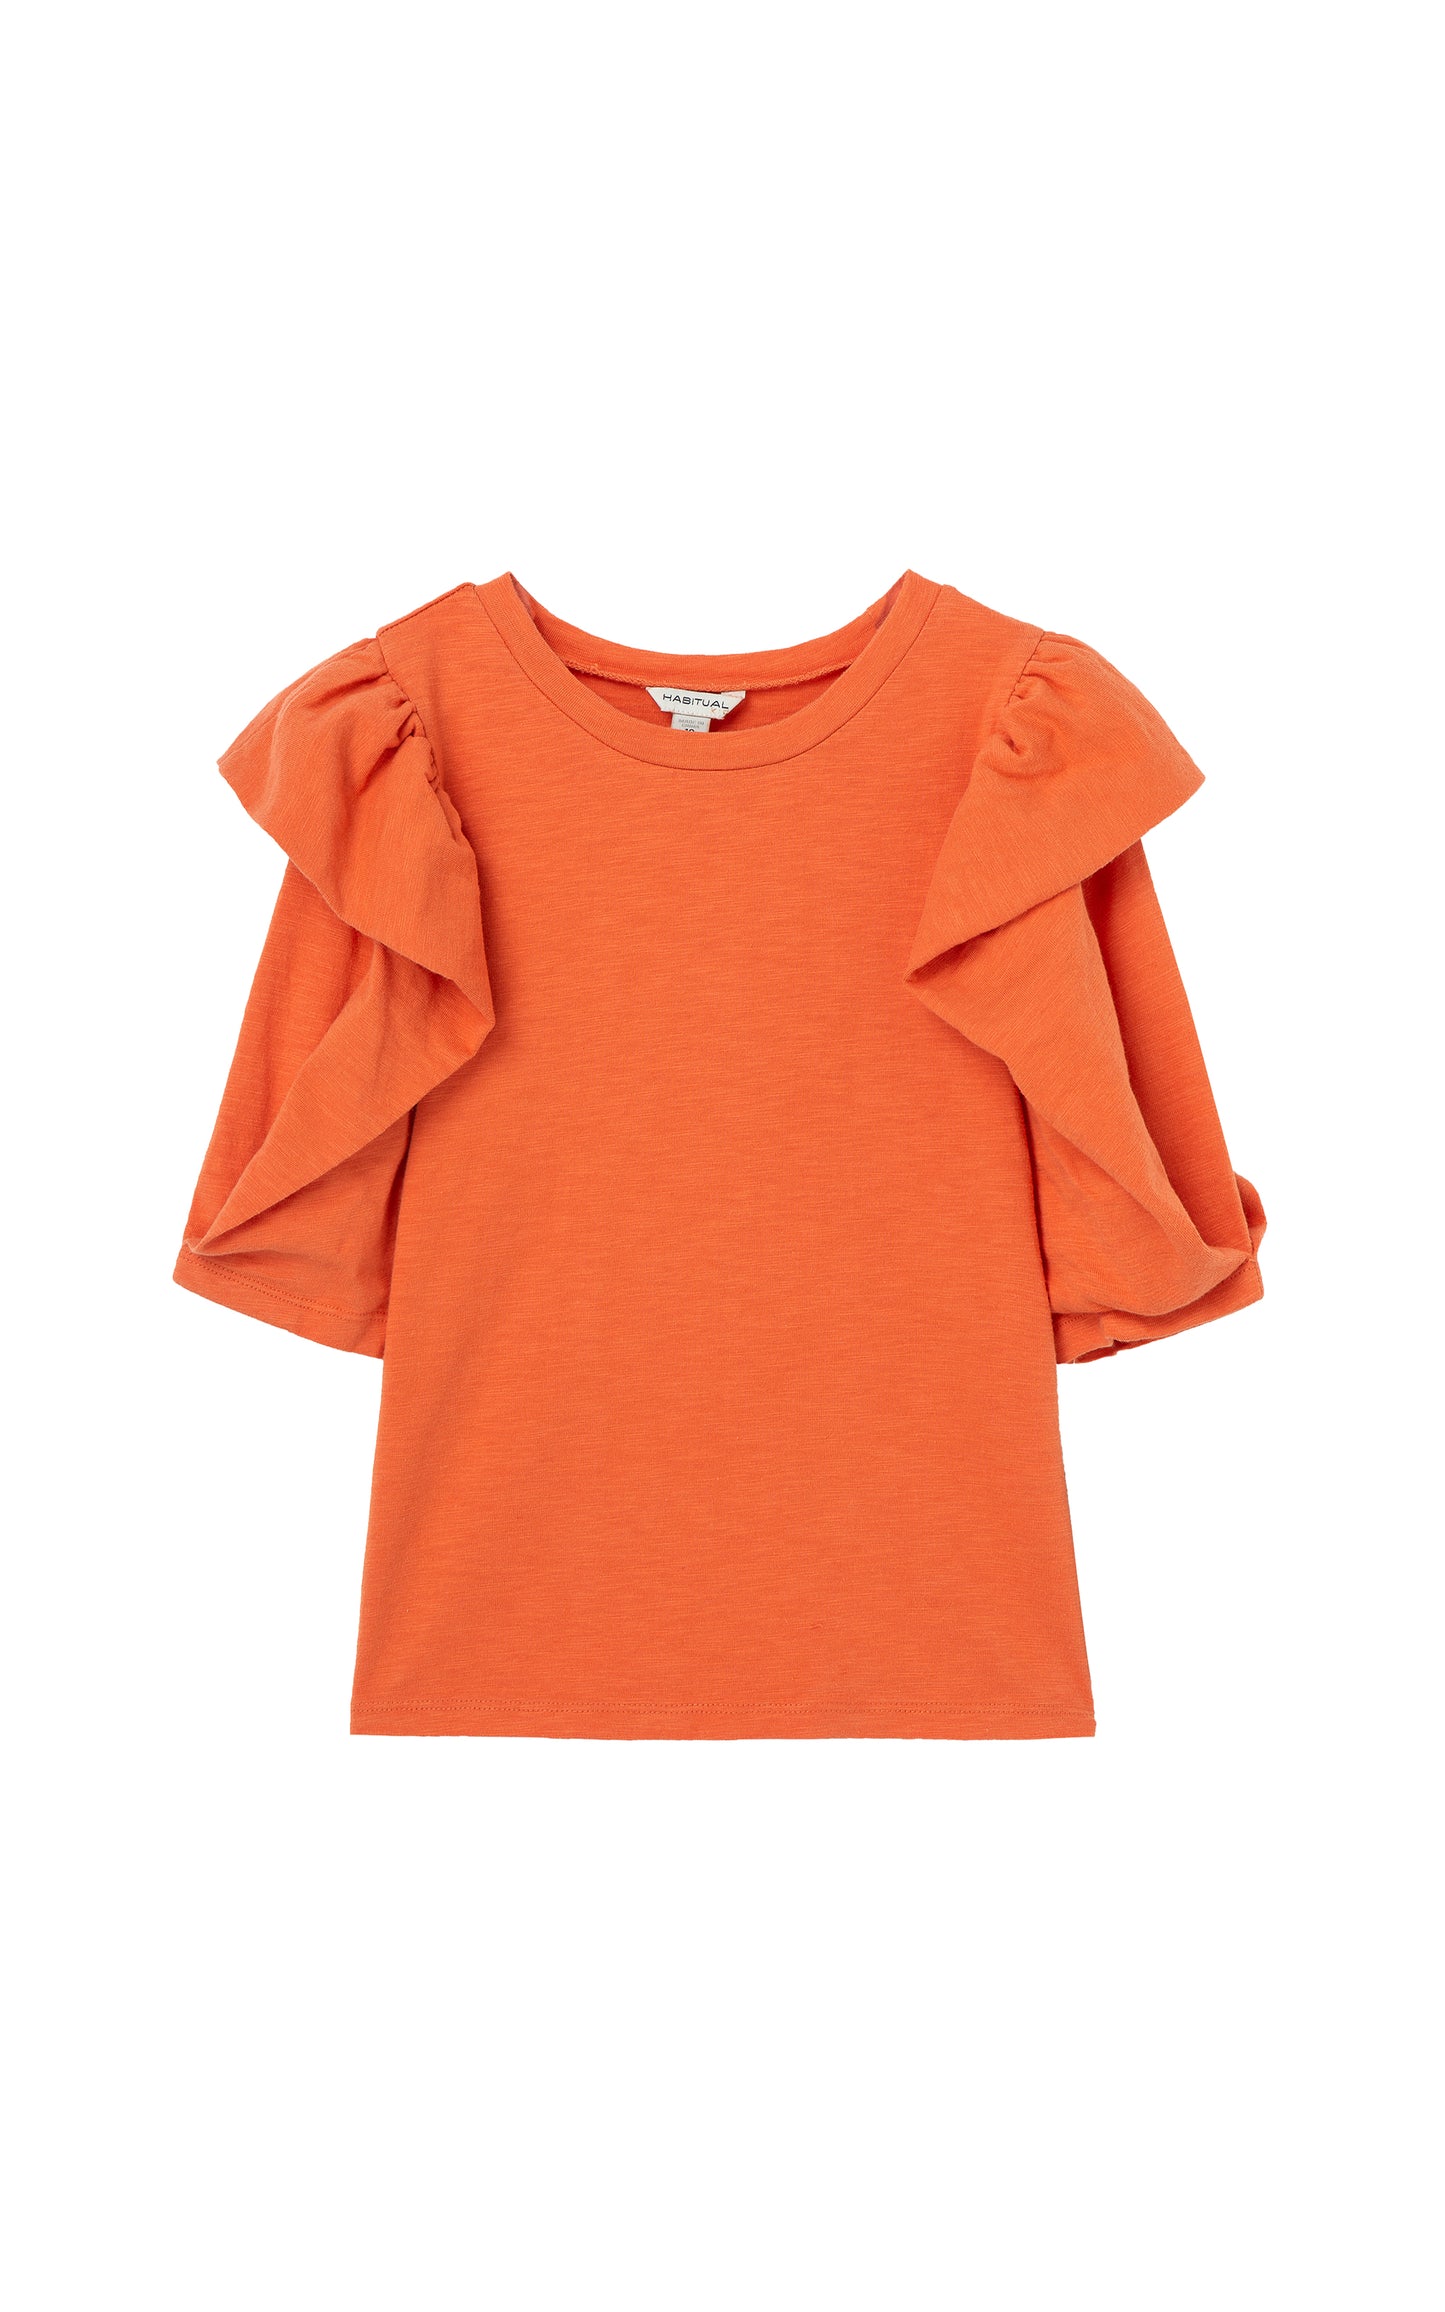 Front View Orange  Top with Large sleeve ruffle 